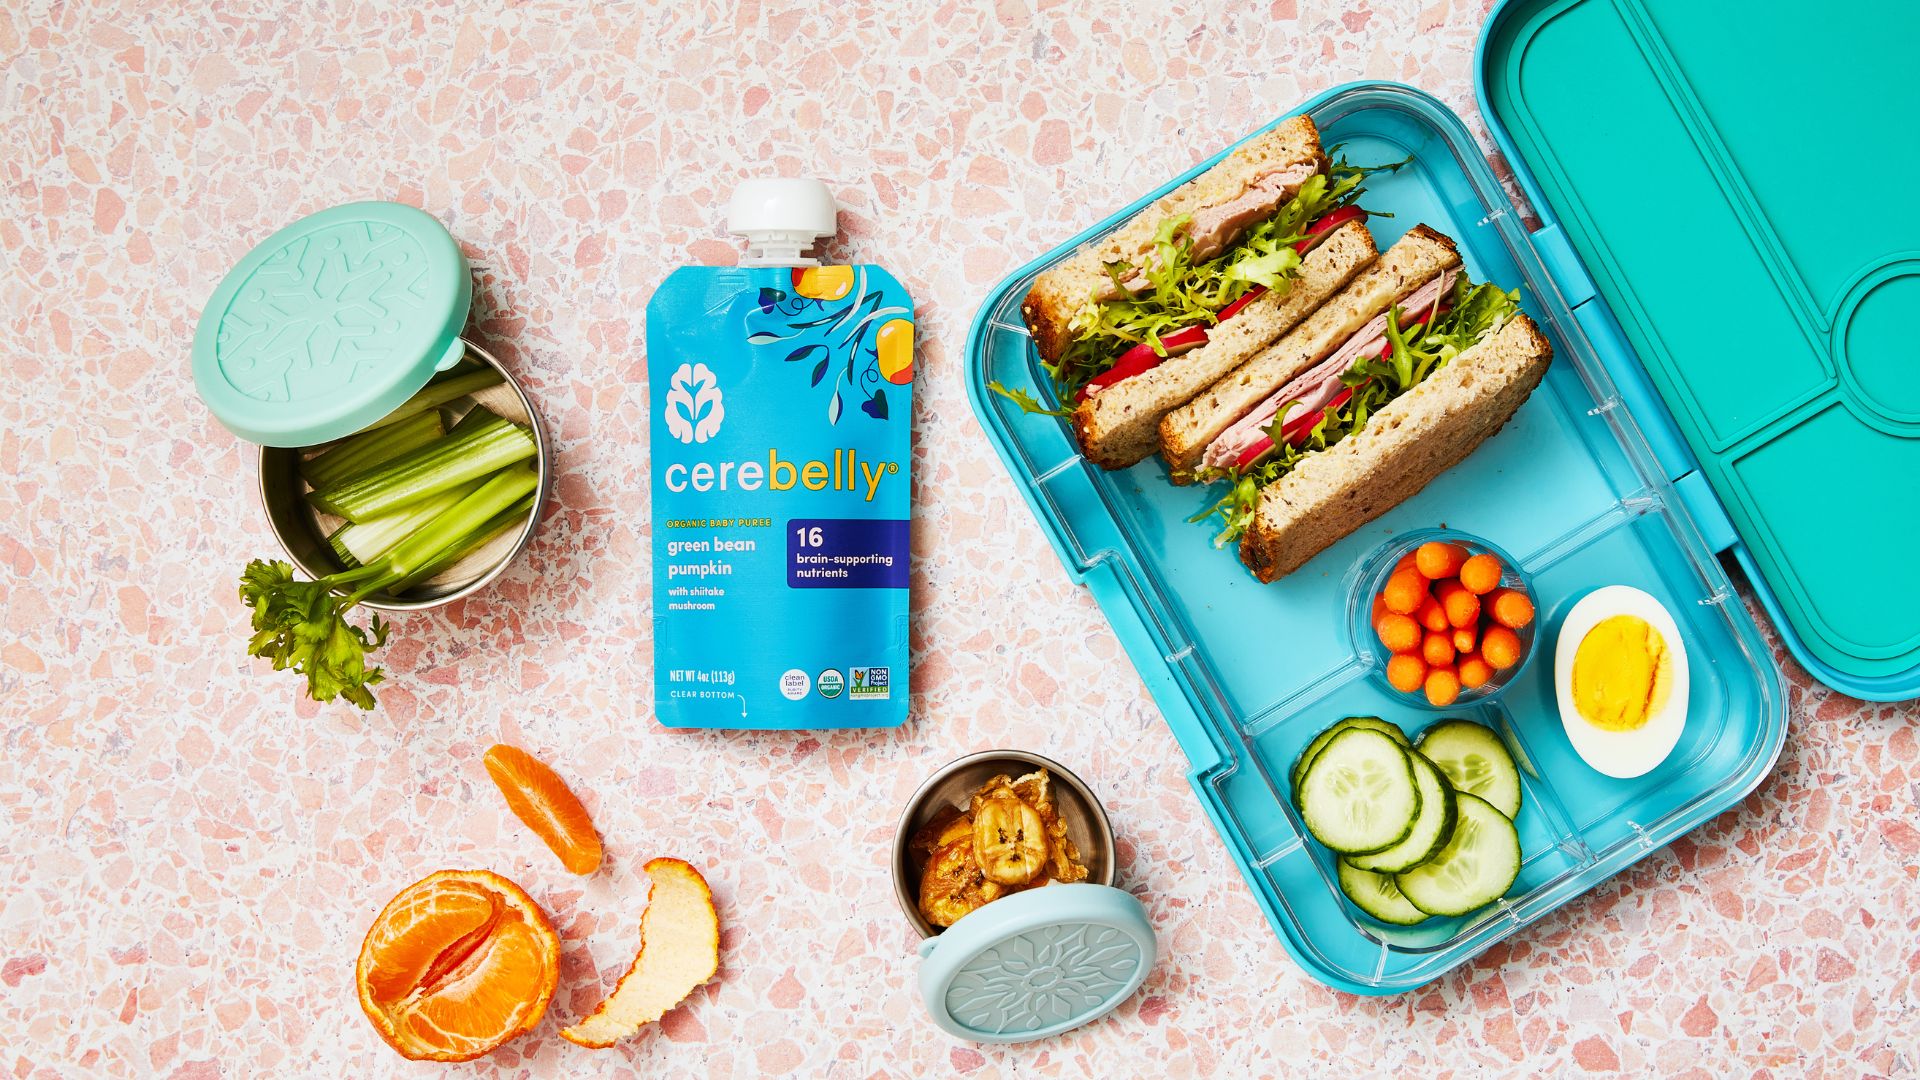 preparing healthy lunches for toddlers